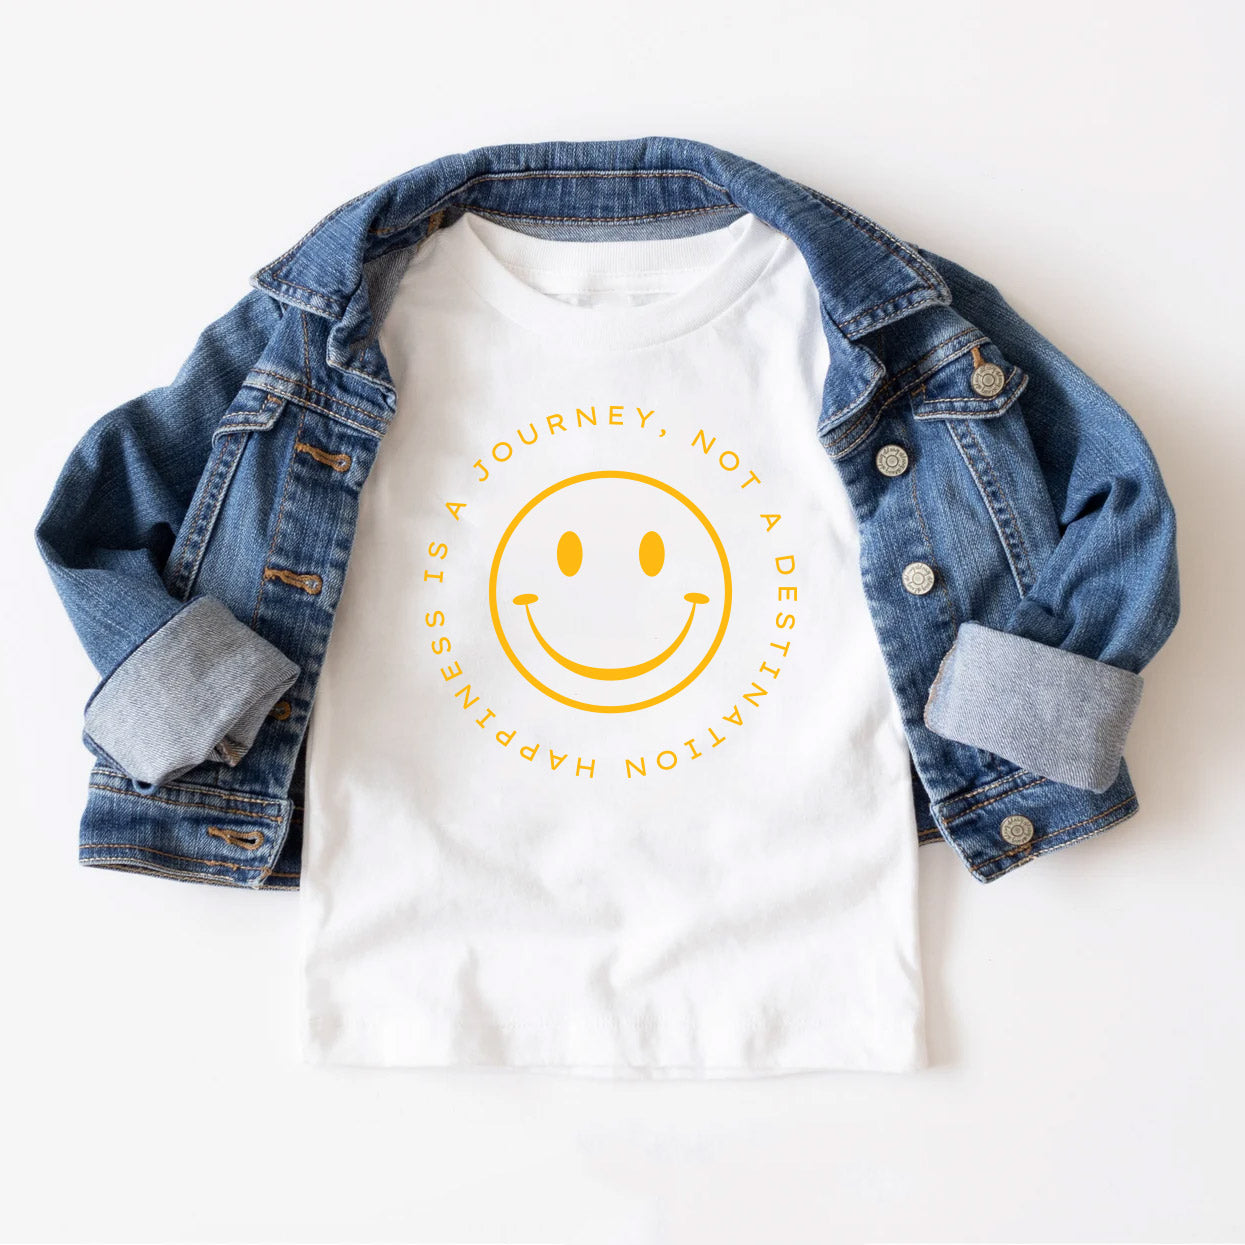 Happiness is a Journey... Kids, Girls Short Sleeve T-shirt FABVOKAB